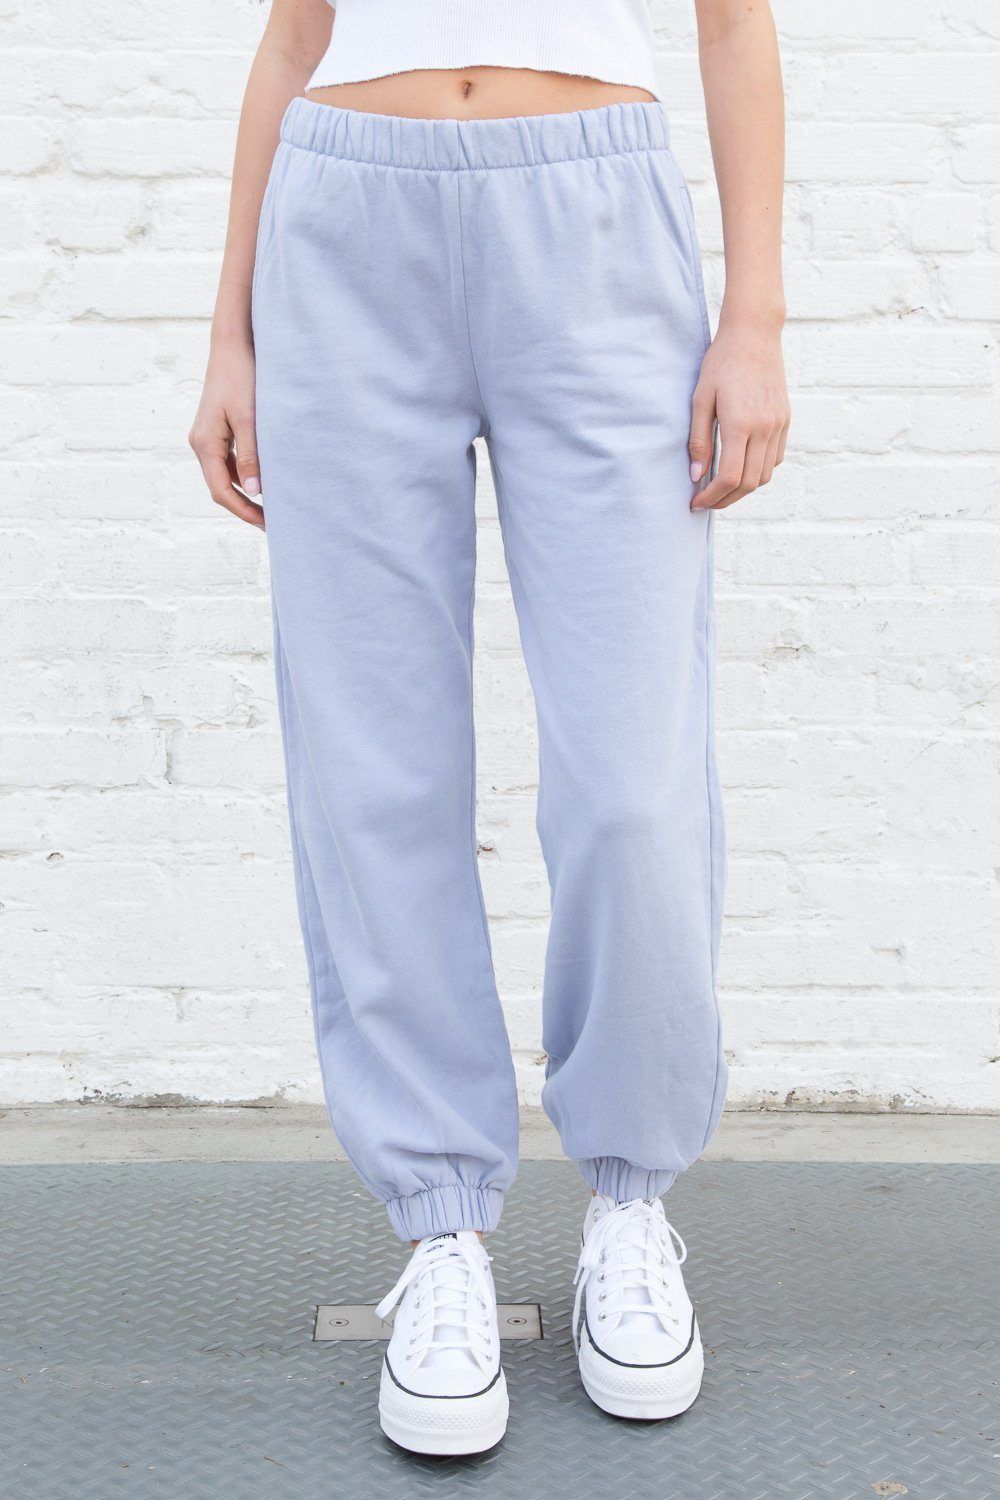 Brandy Melville Sweatpants - Shop the Latest Collection